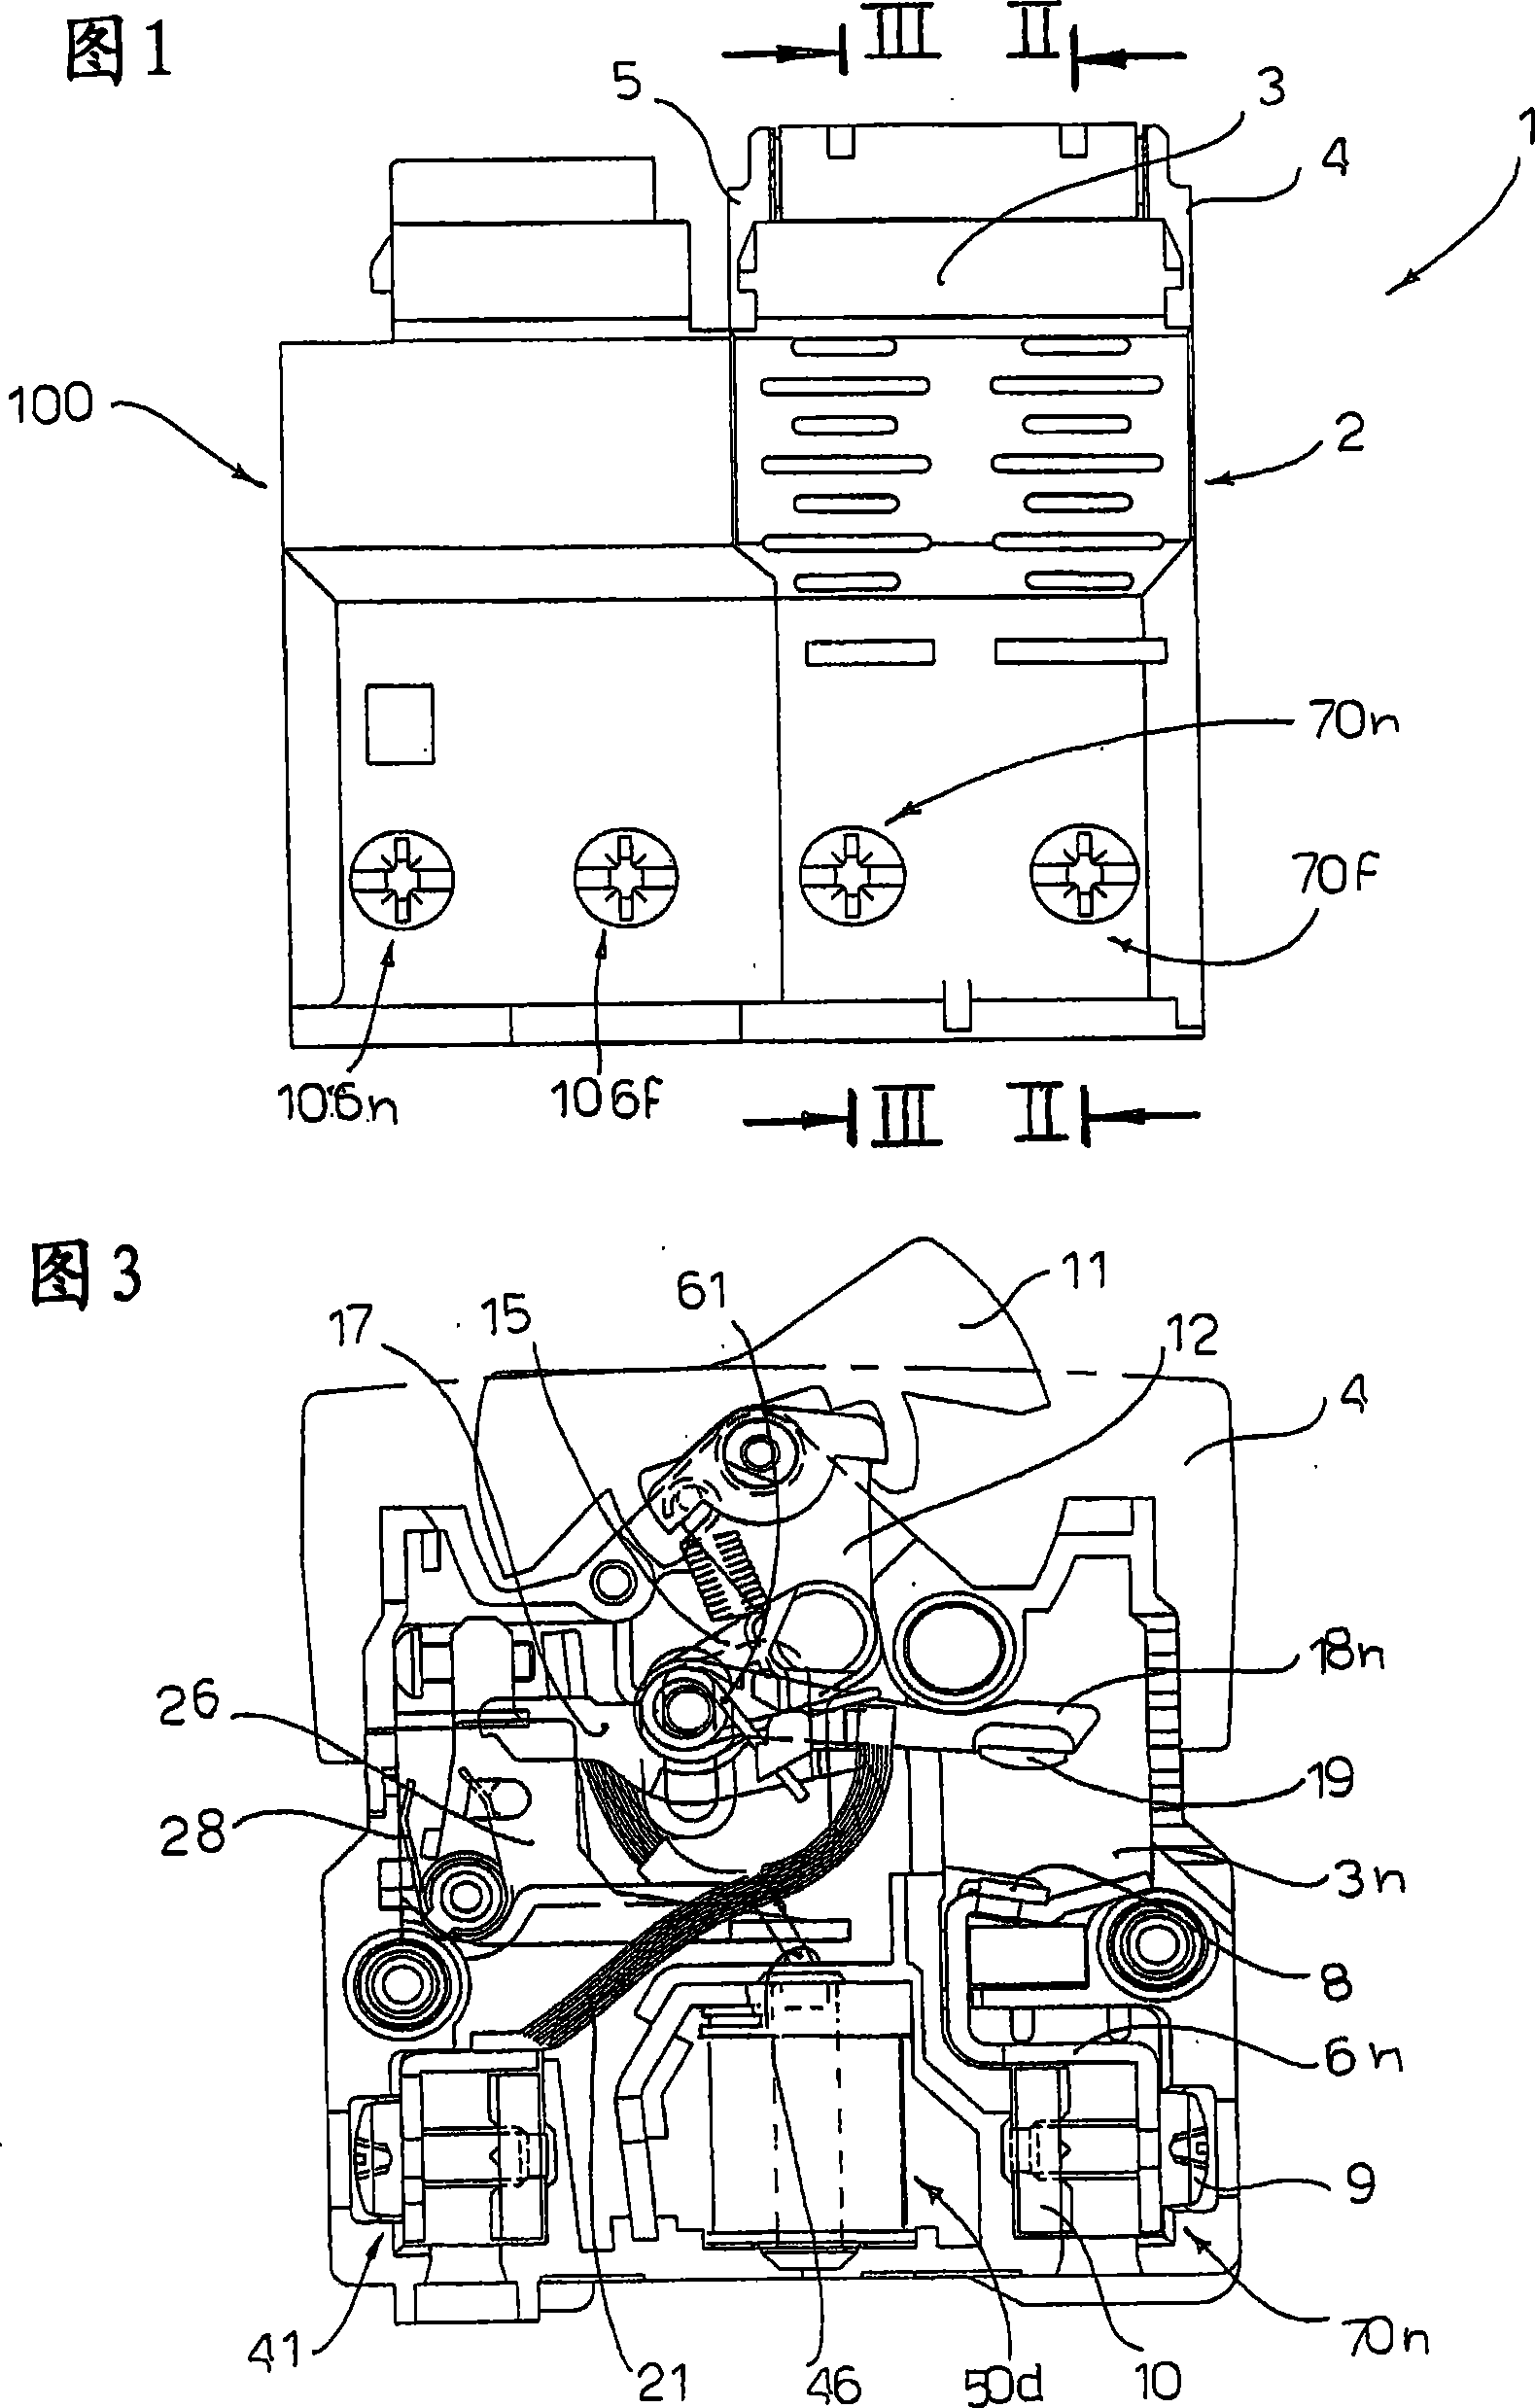 Differential thermomagnetic switch